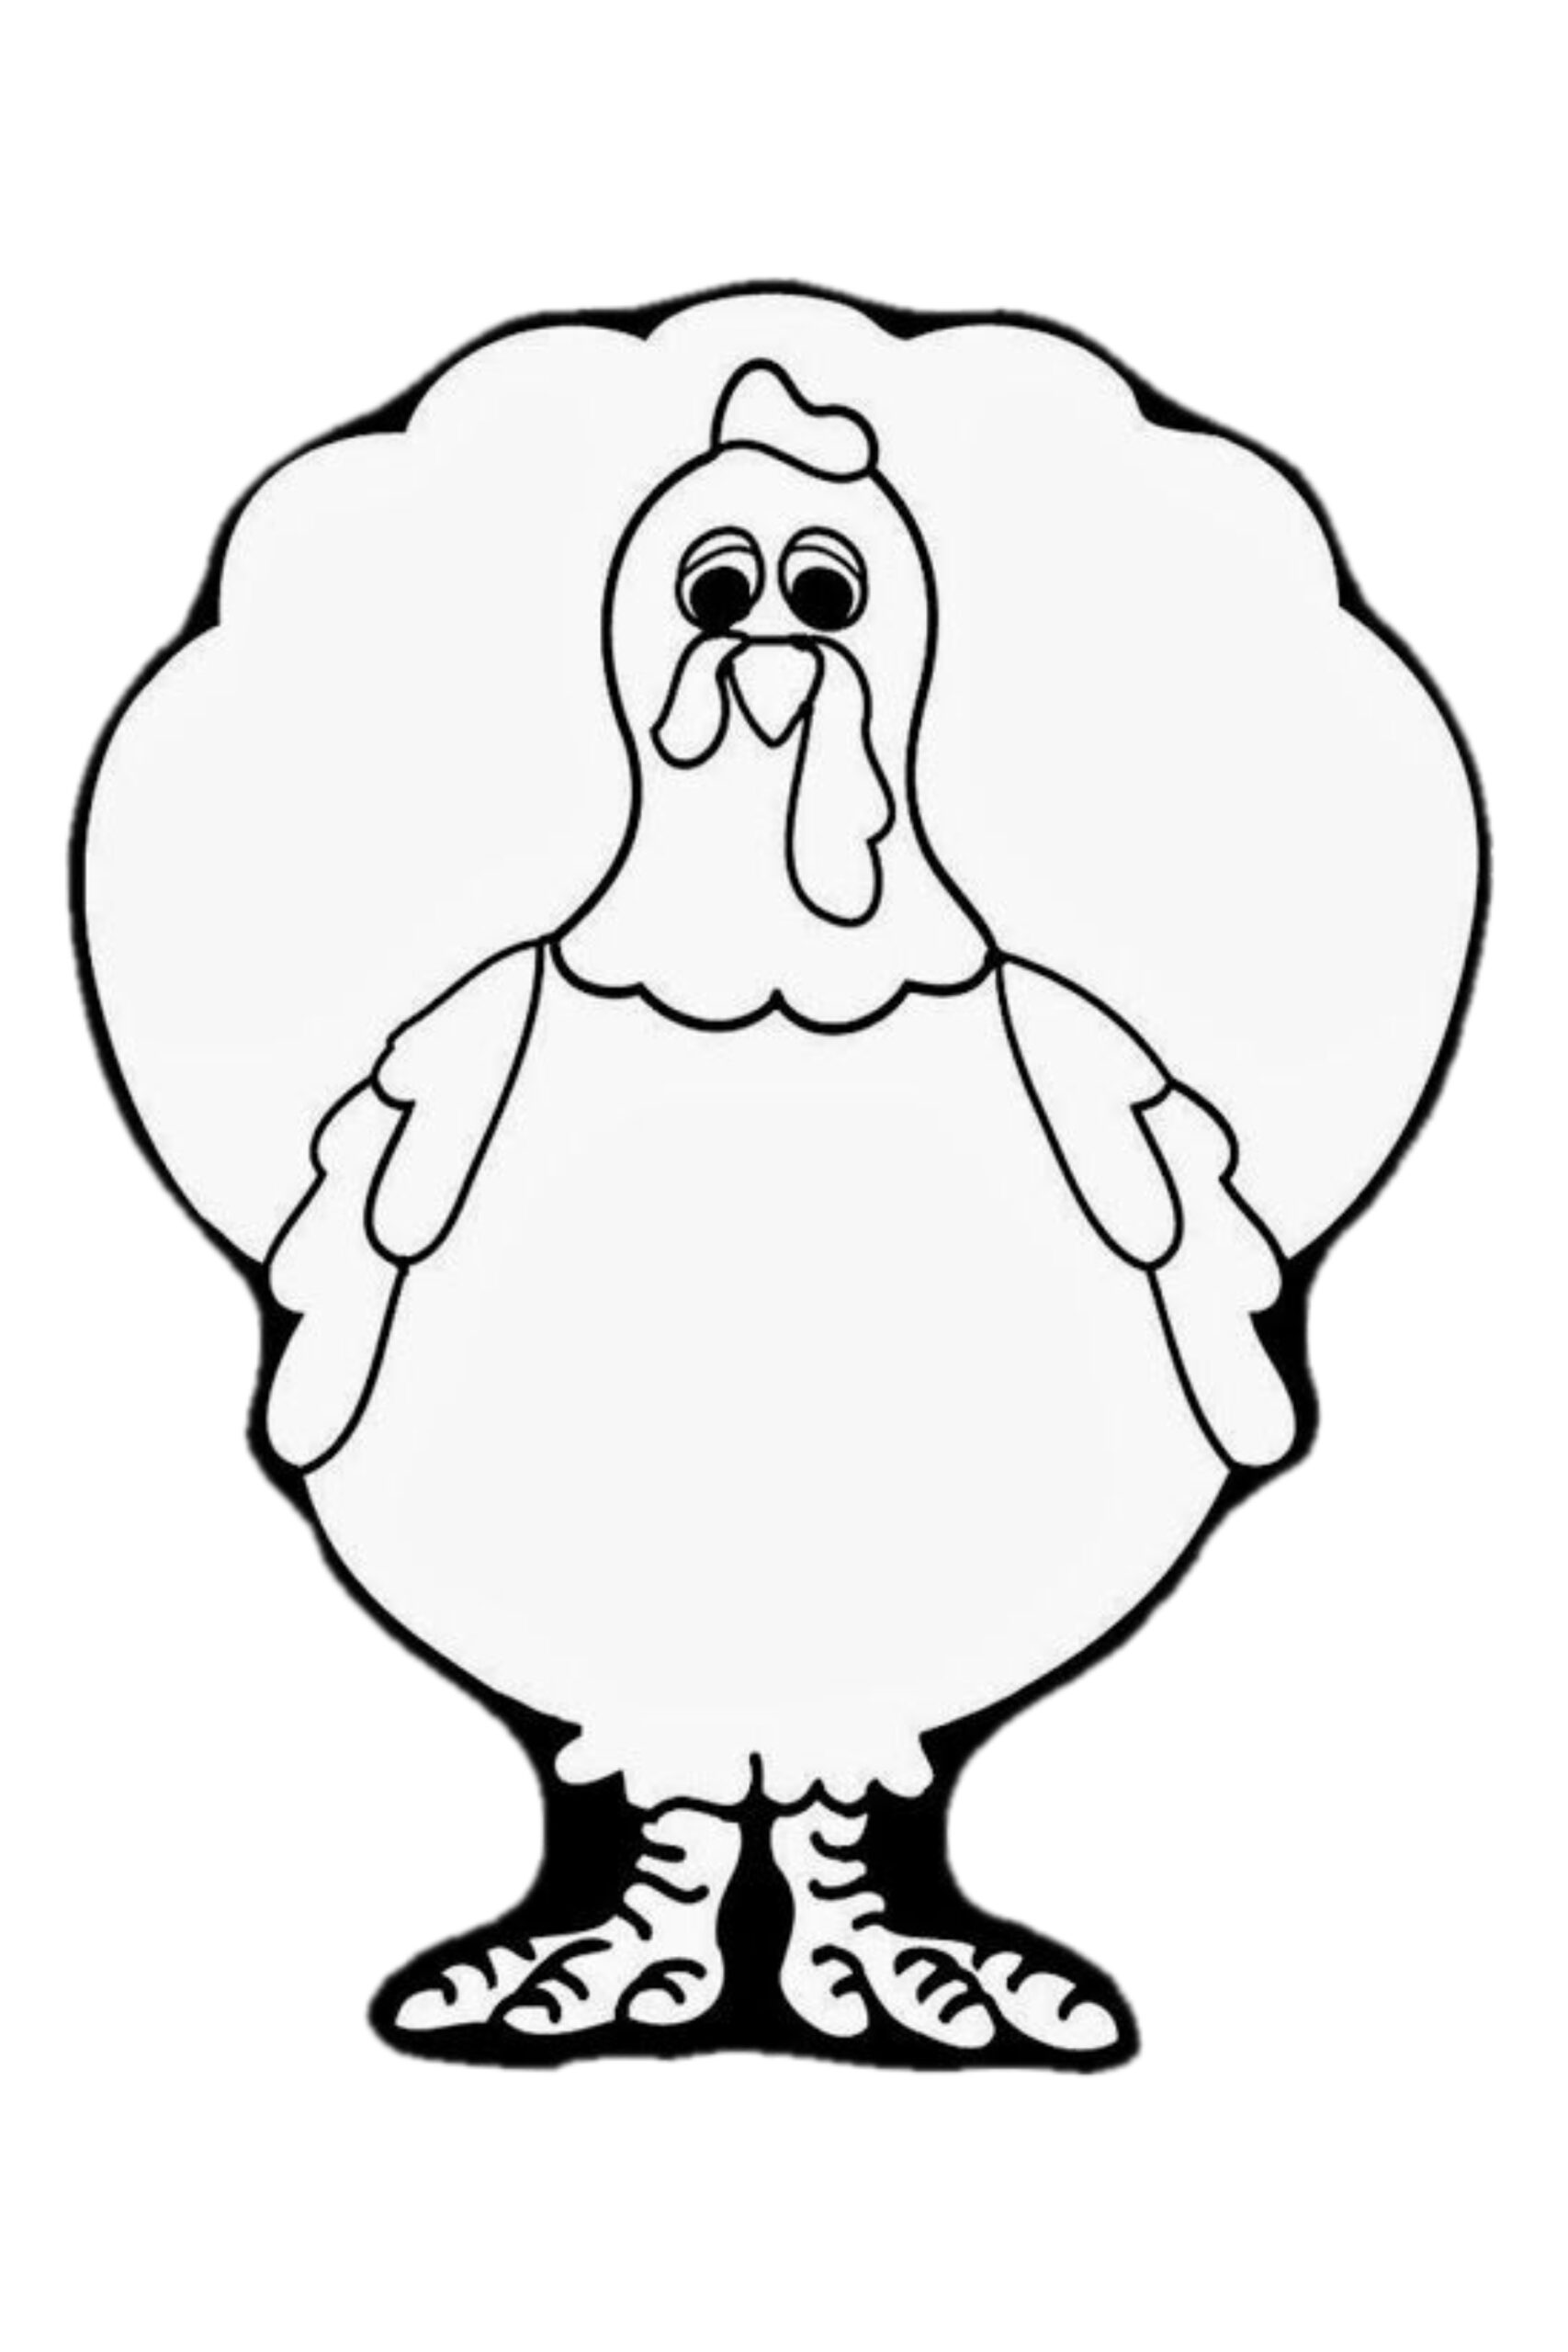 Turkey in Disguise Free Template Throughout Blank Turkey Template